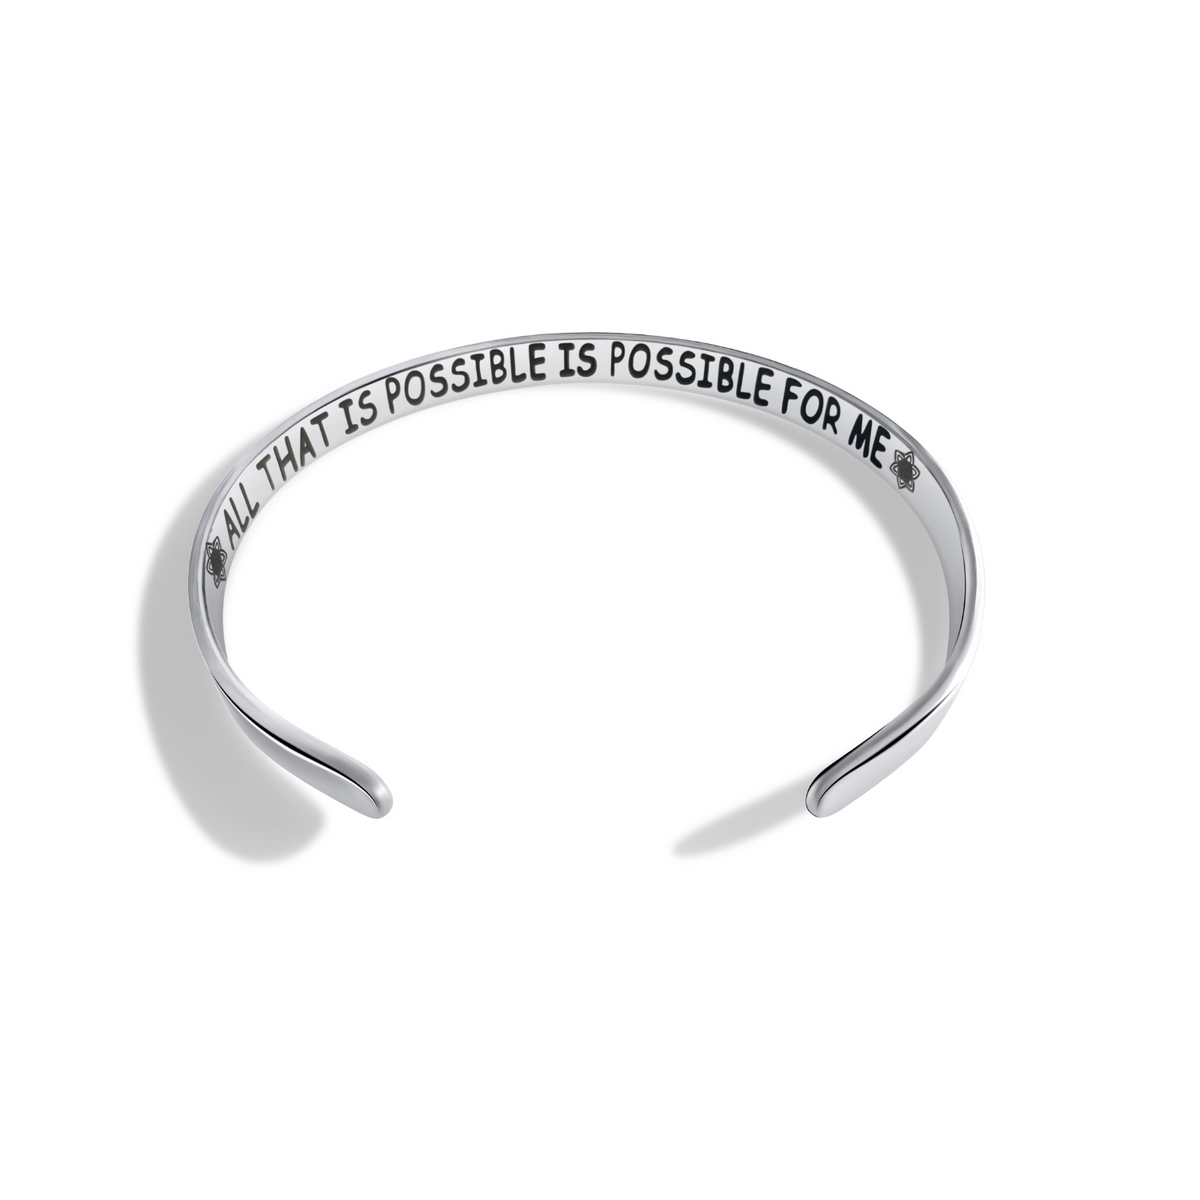 All that is Possible is Possible for Me (Mantra Cuff)